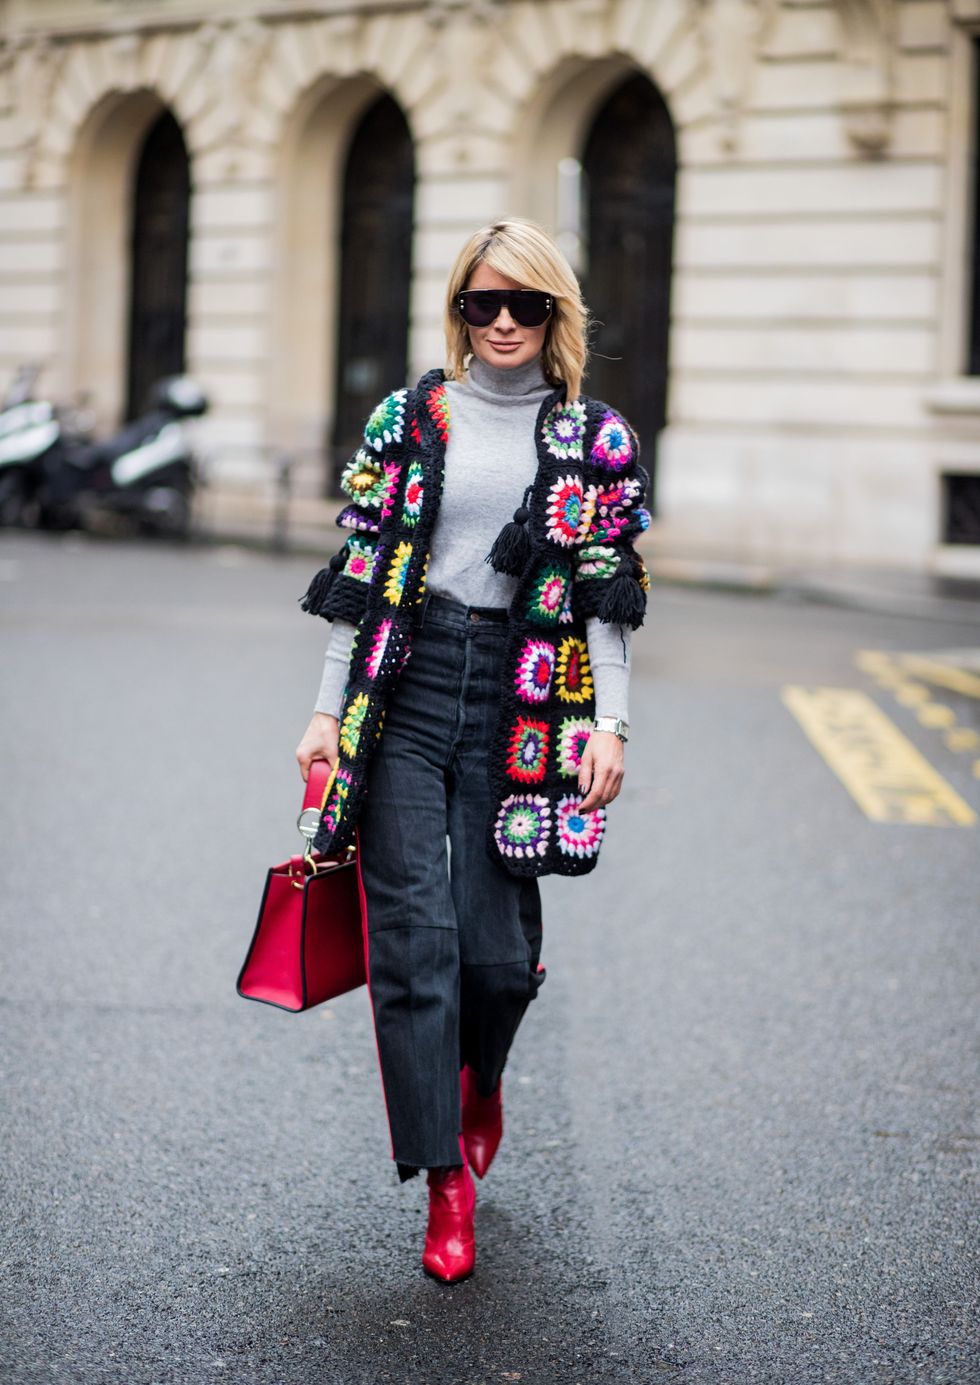 PARIS, FRANCE - MARCH 02: Gitta Banko wearing a multi-colored patchwork cardigan by Amma Mode, light-grey cashmere turtleneck sweater by Bruno Manetti, black jeans with red stripes by Vetements, red sock boots by Fendi, red leather Runaway bag by Fendi, and sunglasses by Dior on March 2, 2018 in Paris, France. (Photo by Christian Vierig/Getty Images)